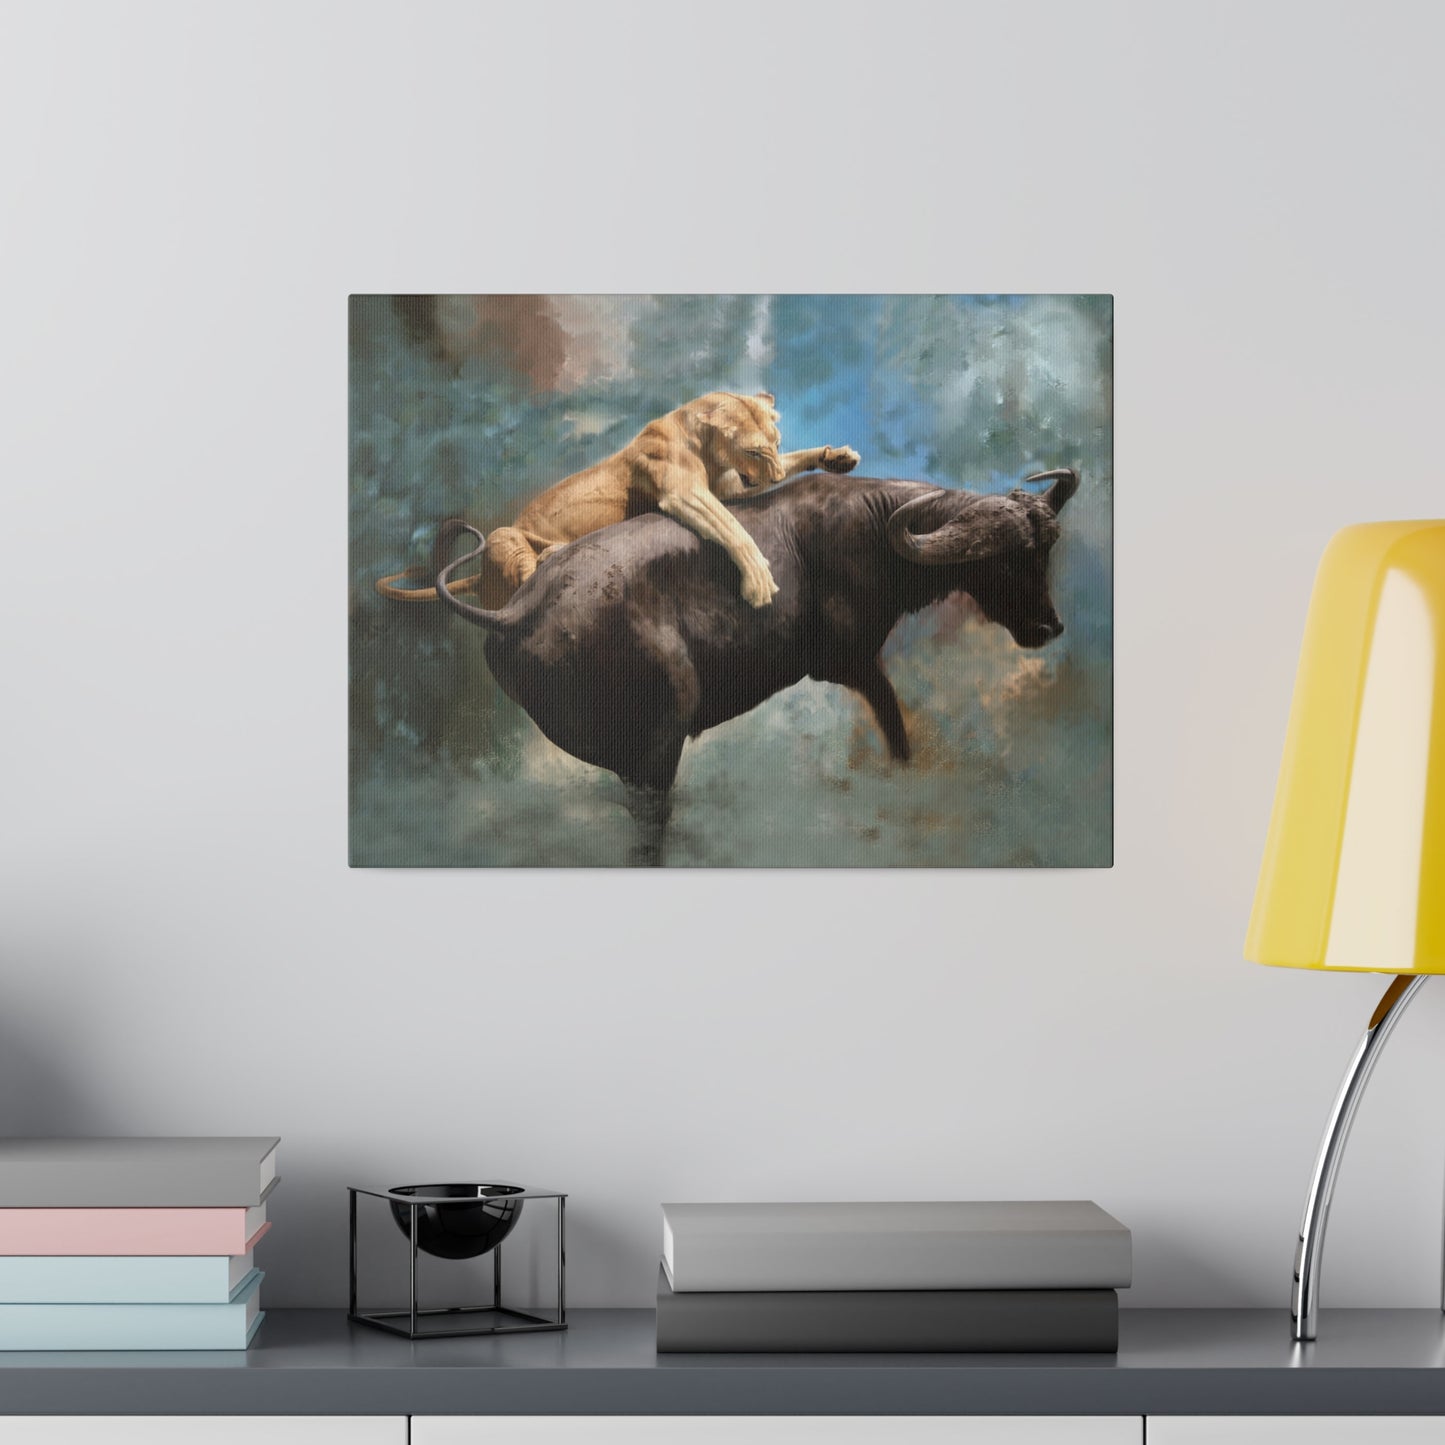 Wildlife Print - The Hunt, Matte Museum Wrap Canvas, Stretched